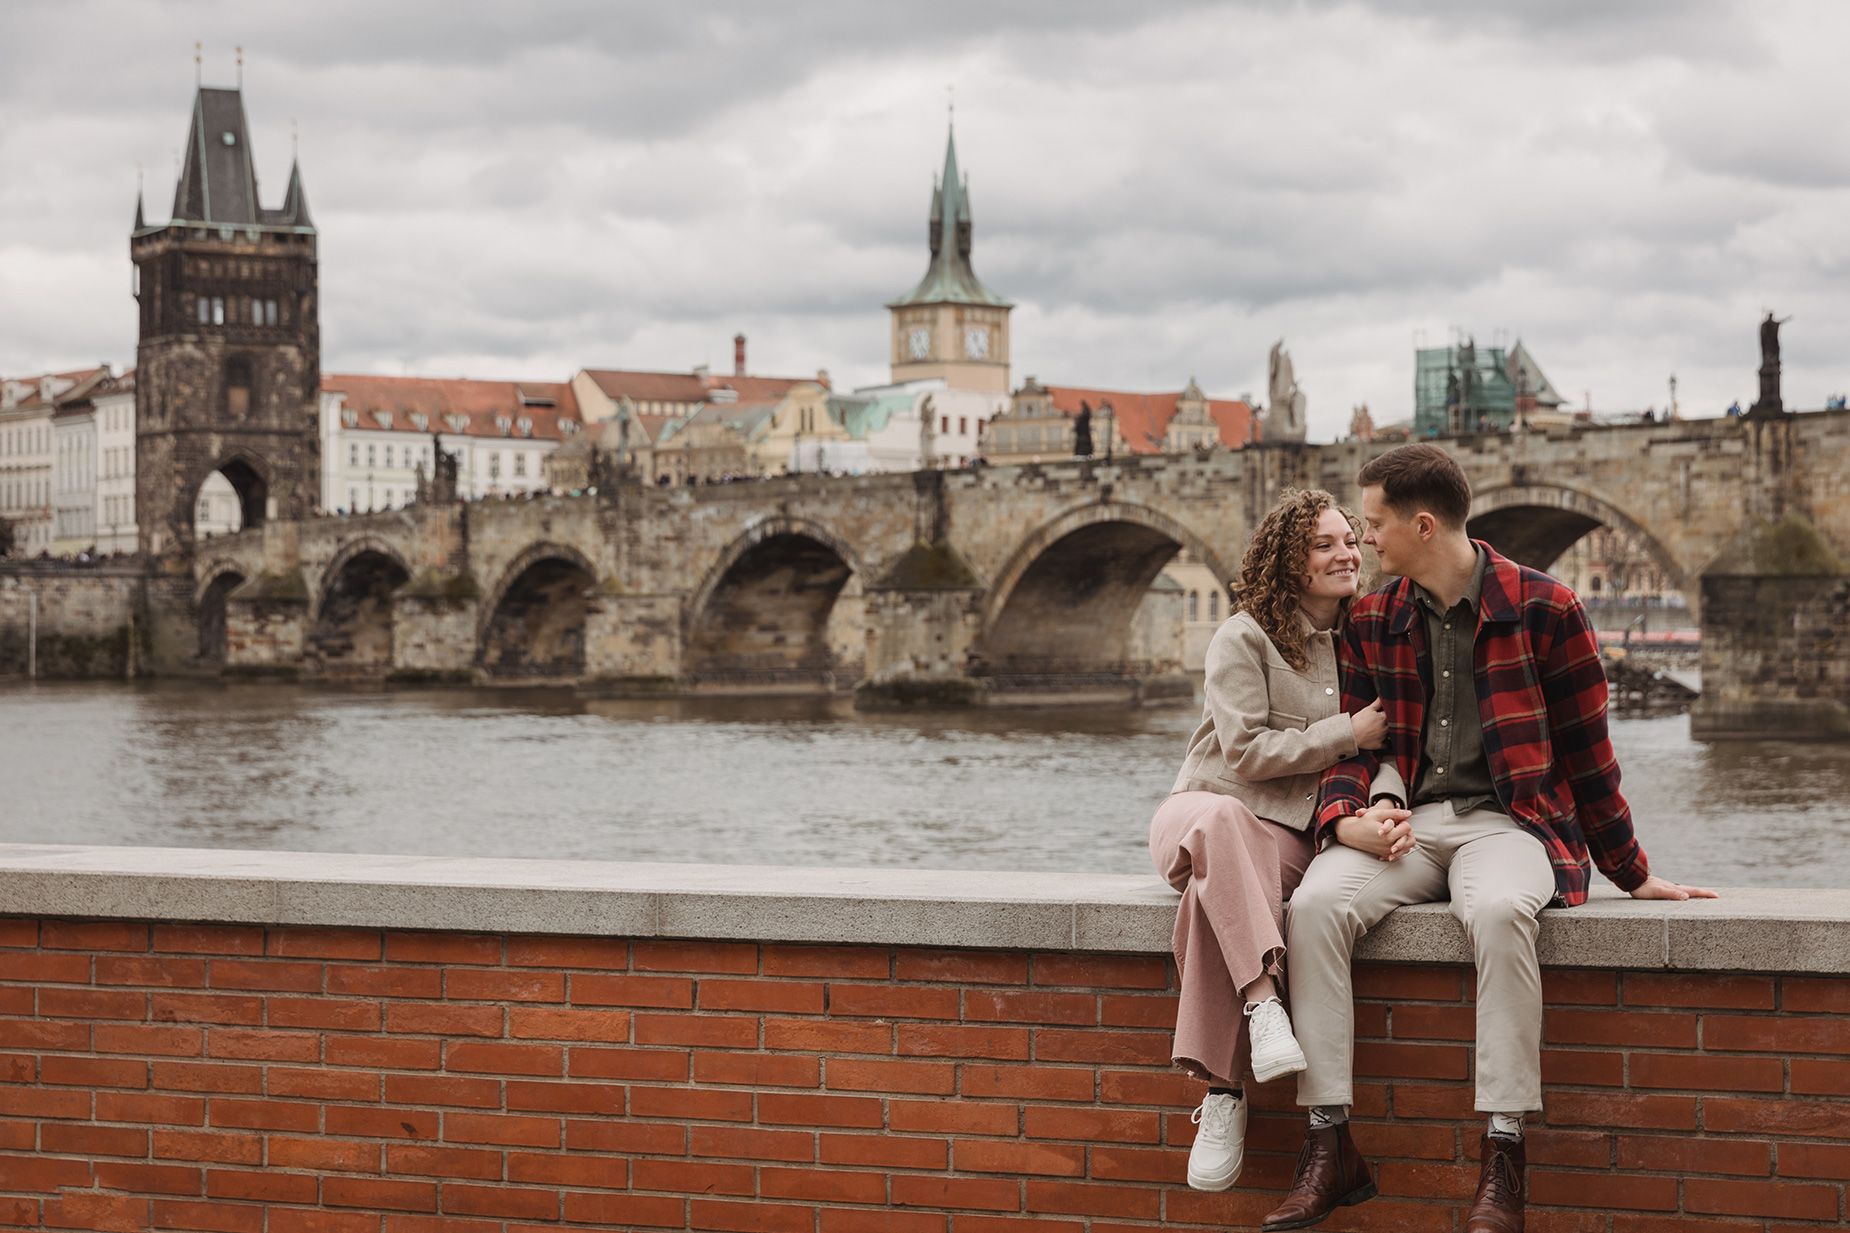 Mandy and Marcus decided to stay in Prague together during the pandemic.